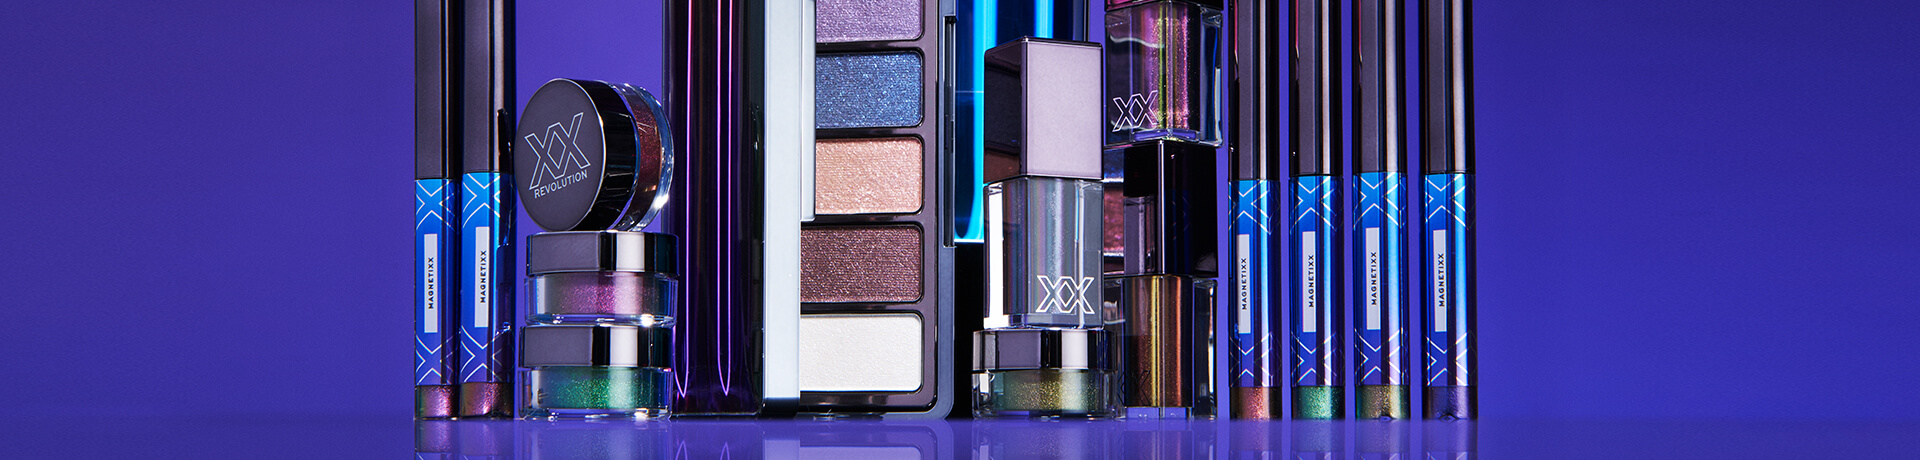 Everything you need to know about our new brand XX Revolution